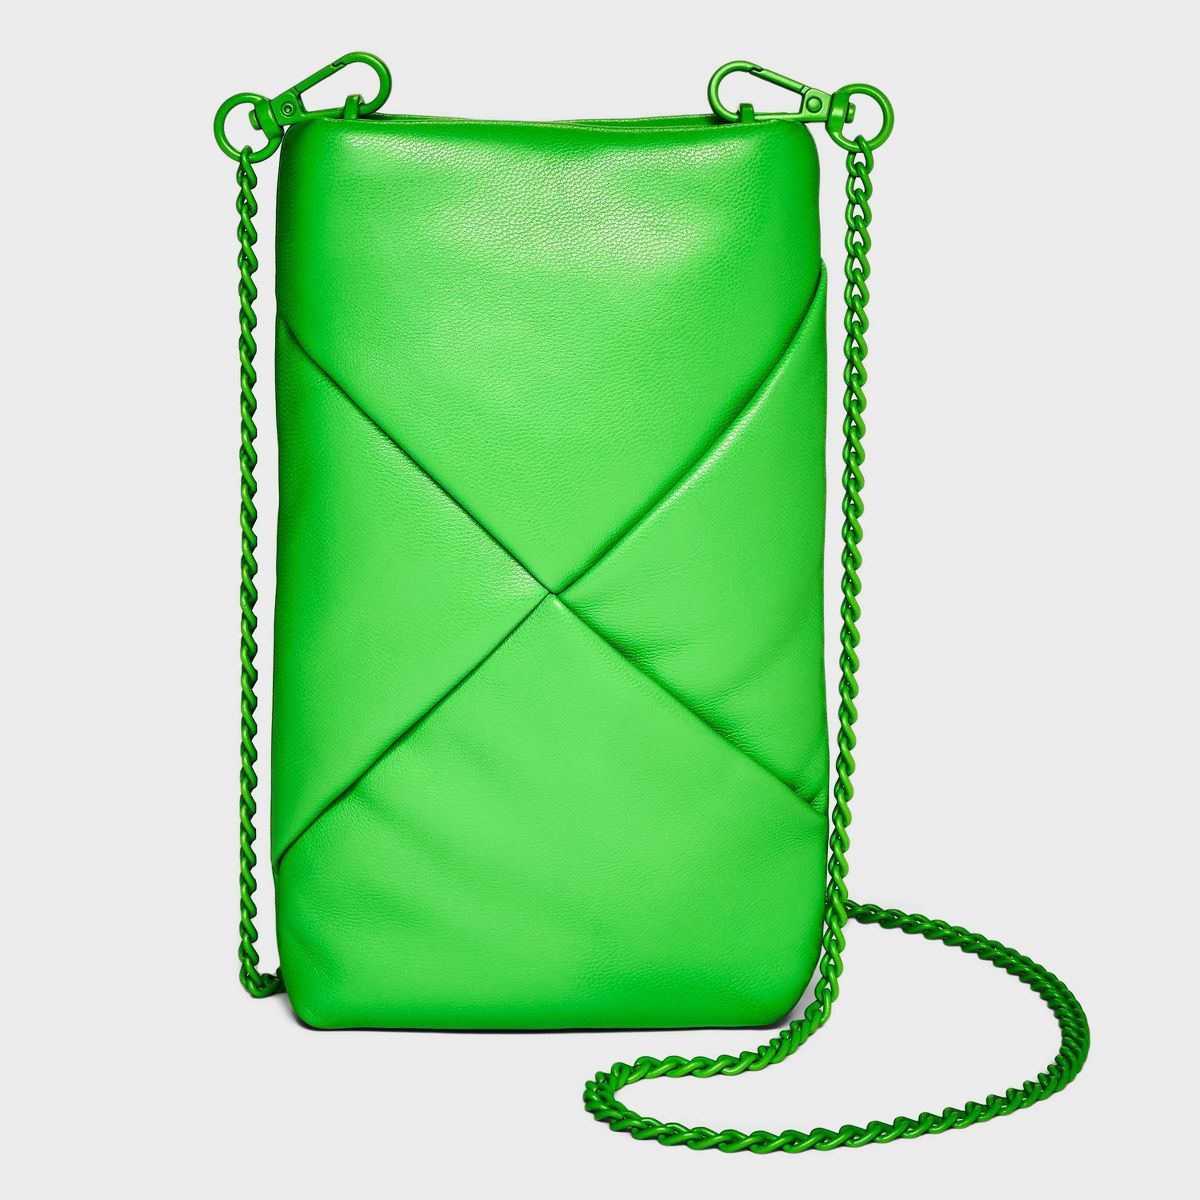 Cell Phone Crossbody Bag - A New Day™ | Target